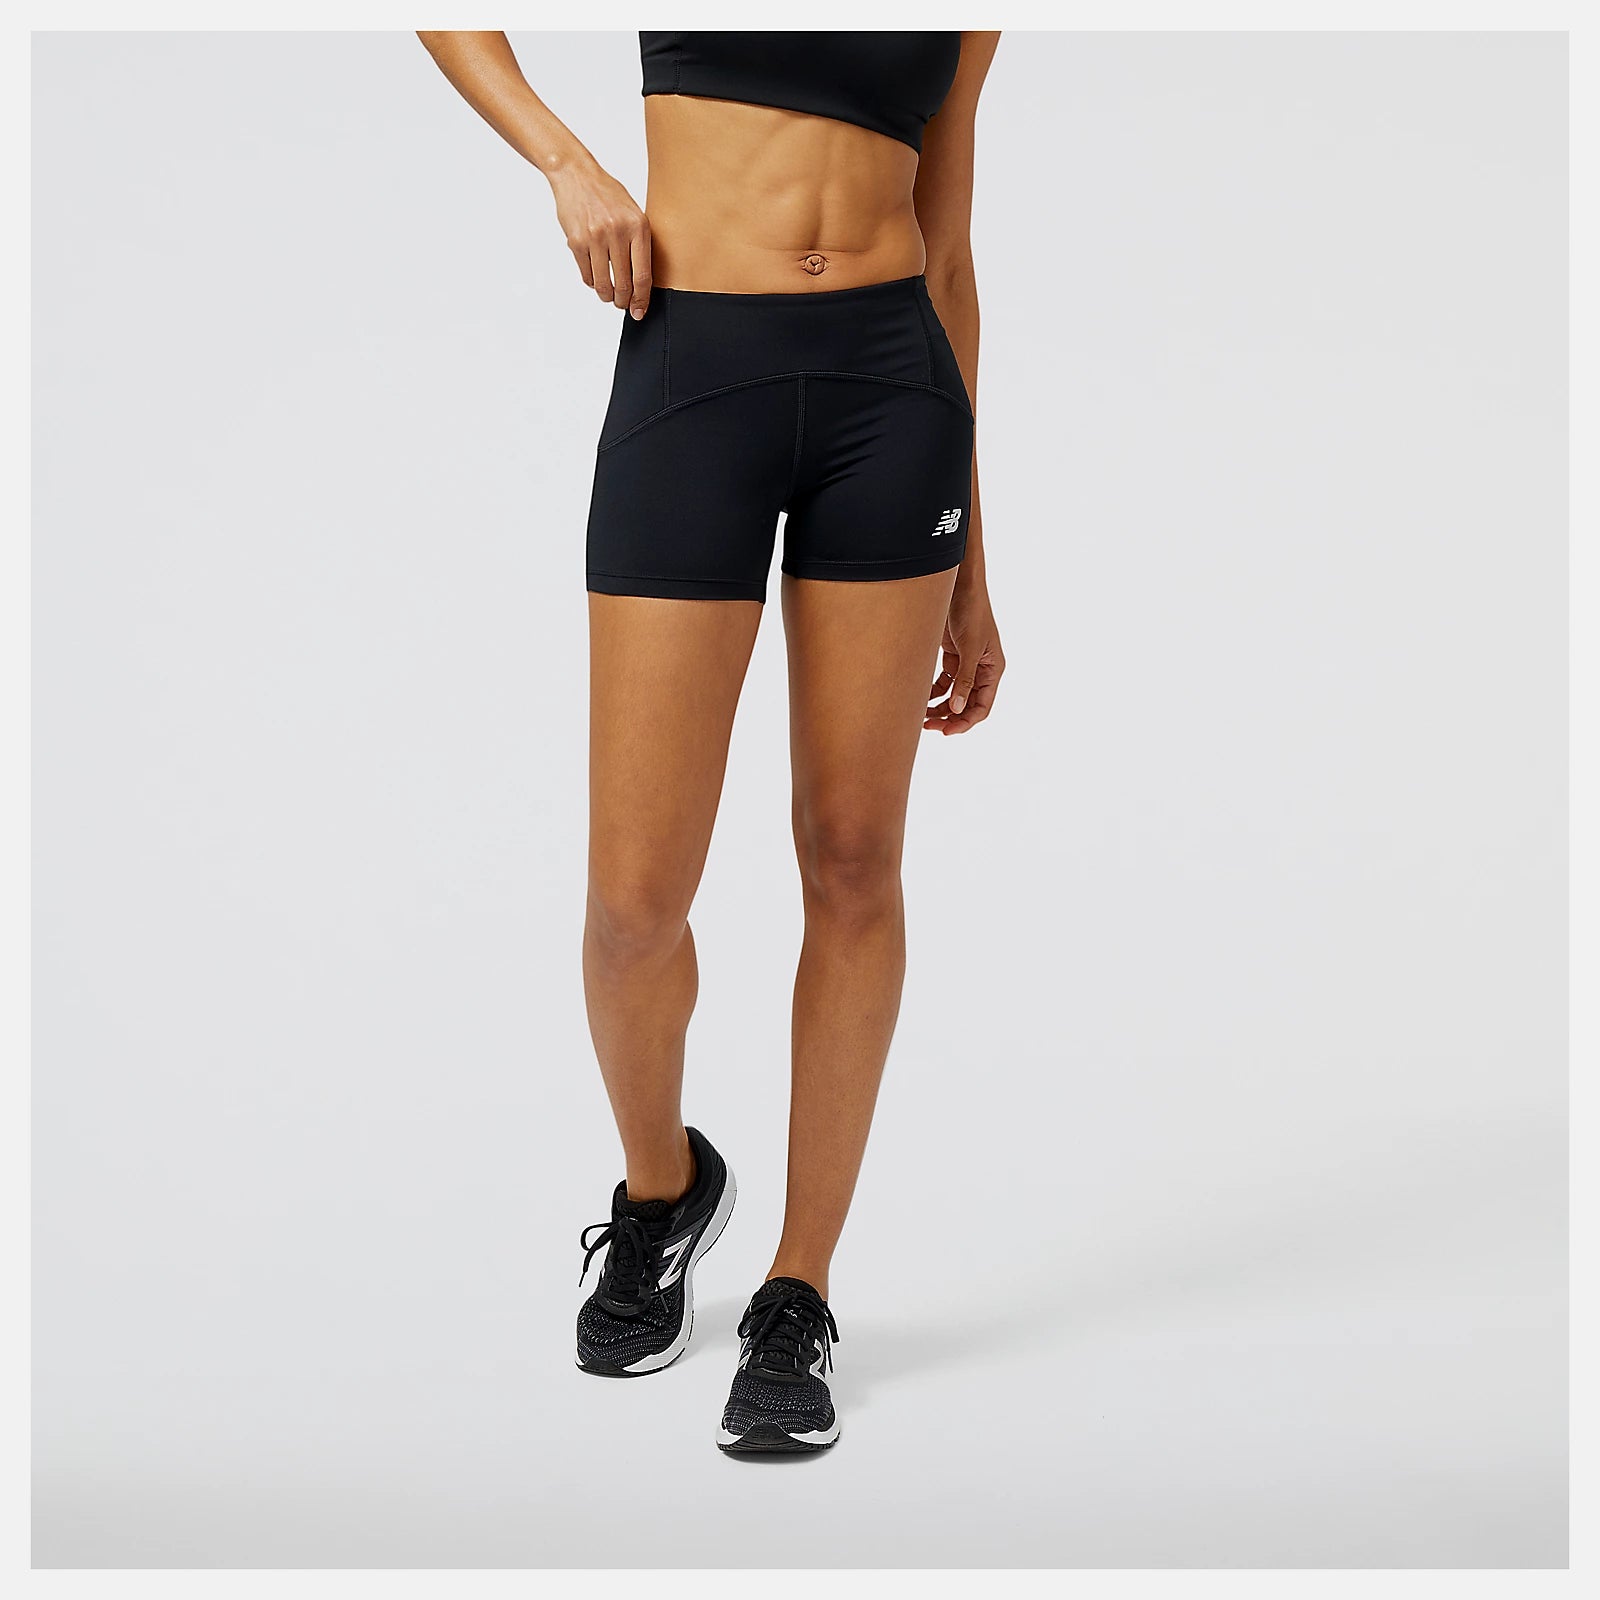 New Balance Women's Accelerate Pacer Tight, Black, Medium at